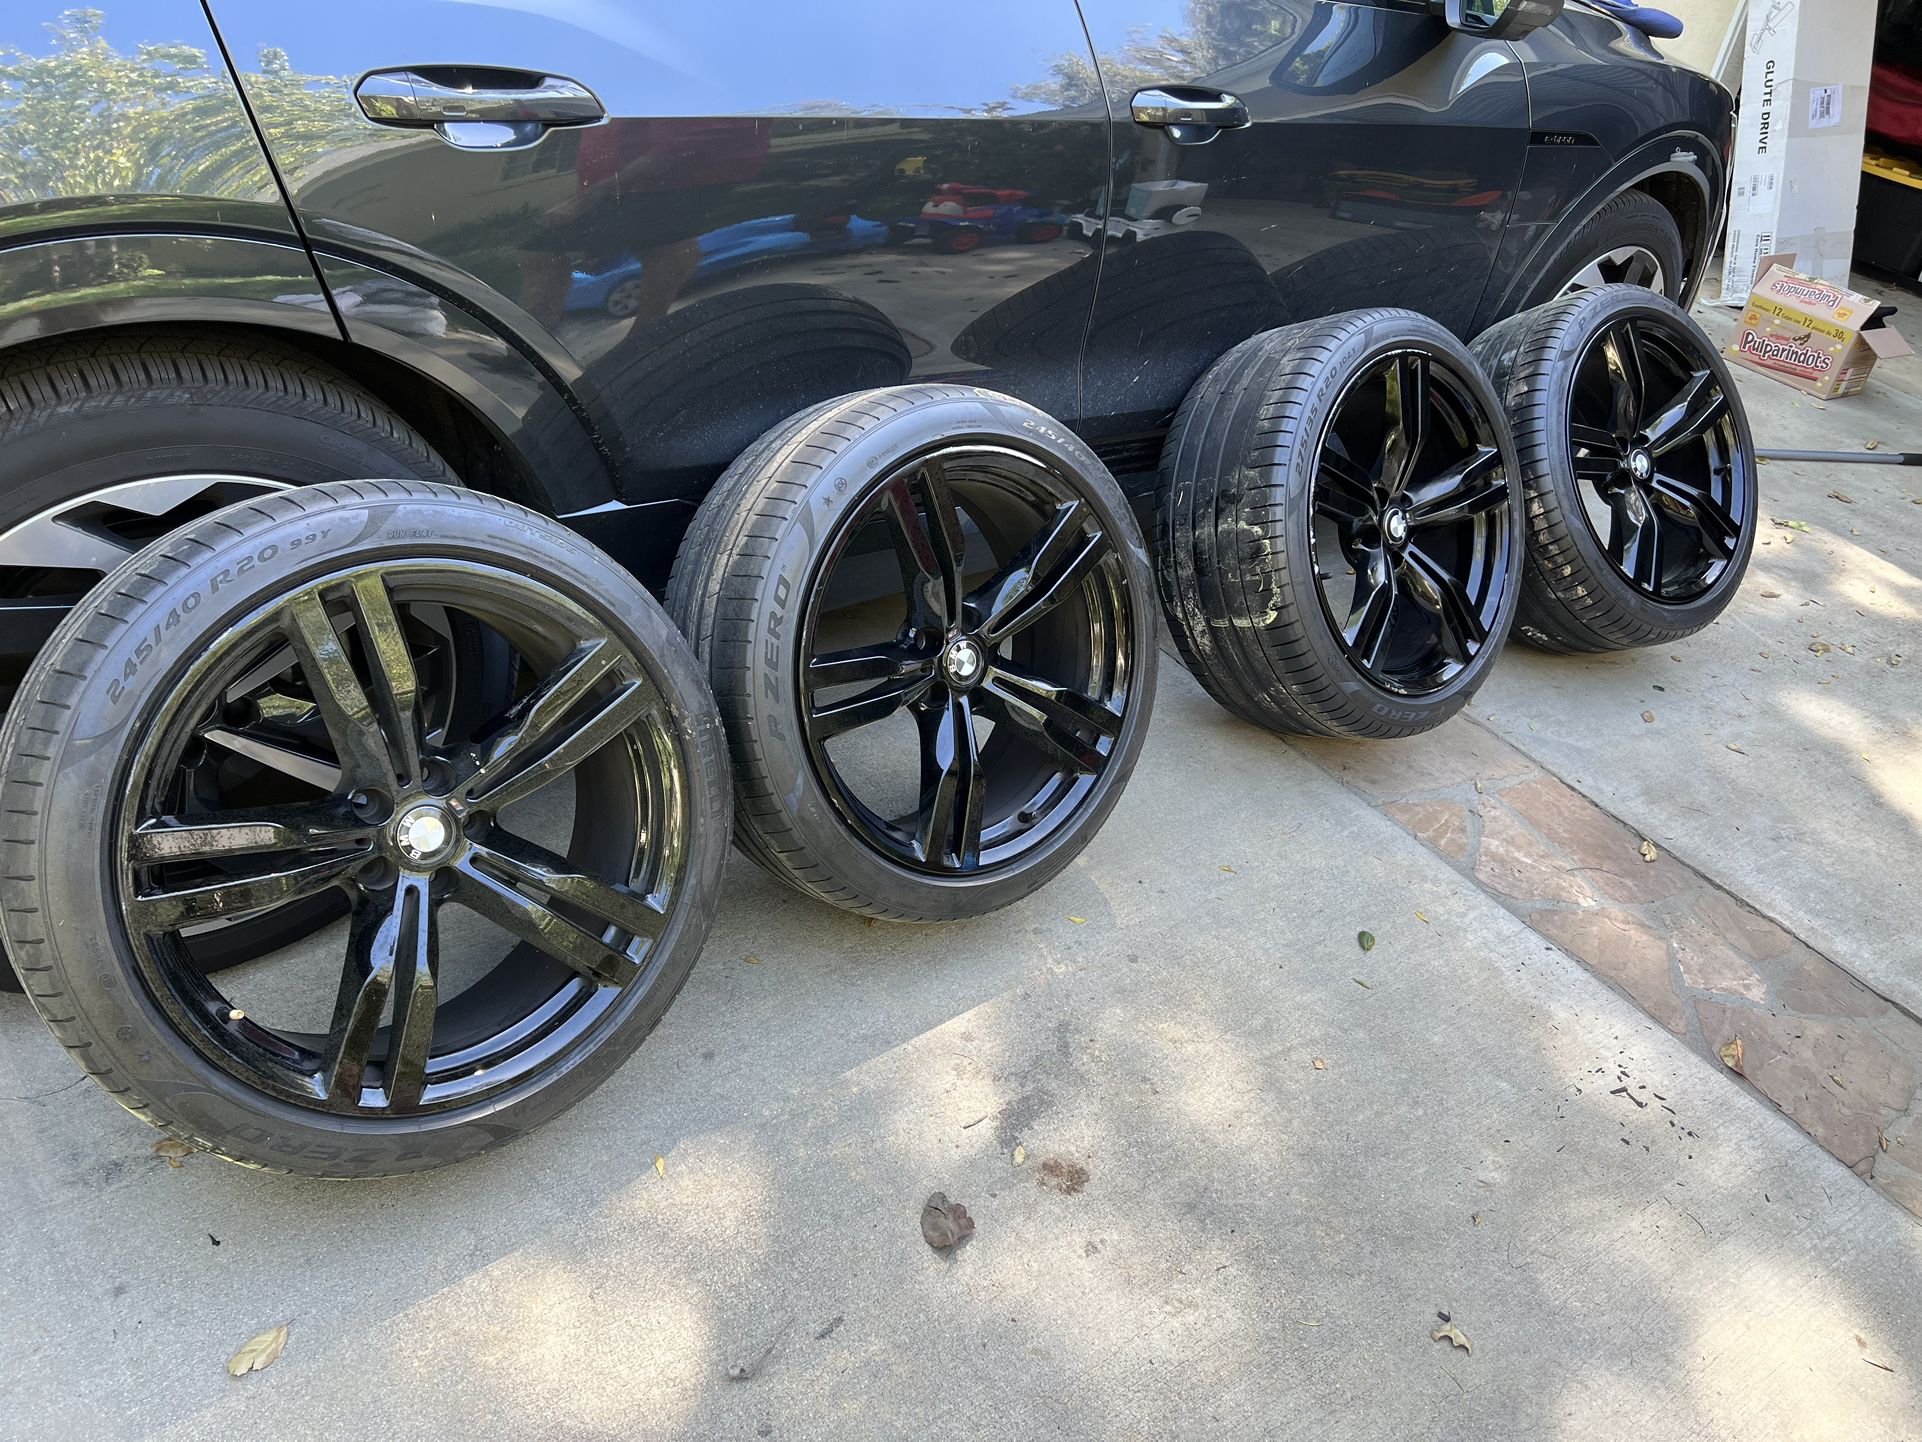 BMW Black Rims 19” Front 22” Back With Pirelli Tires